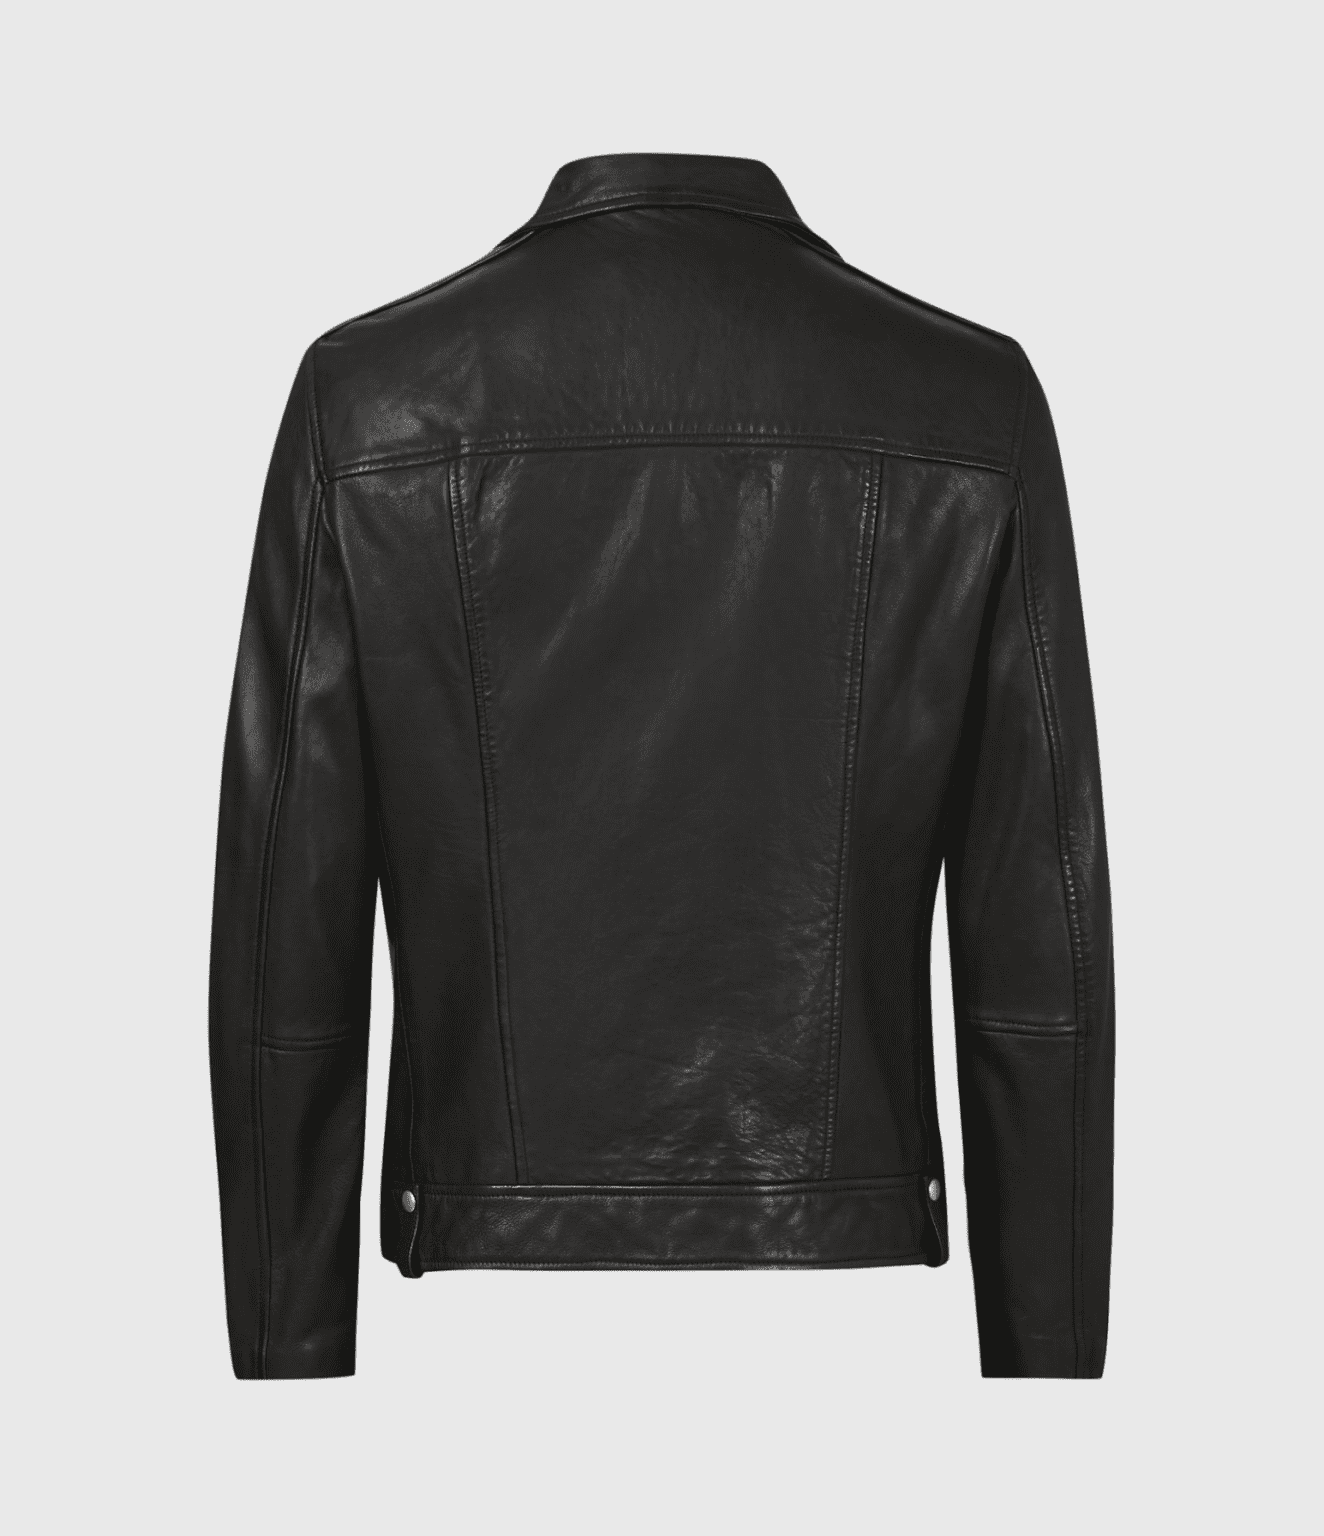 Buying Guide to Leather Jacket that Pair Perfect with Raw Selvedge Jeans